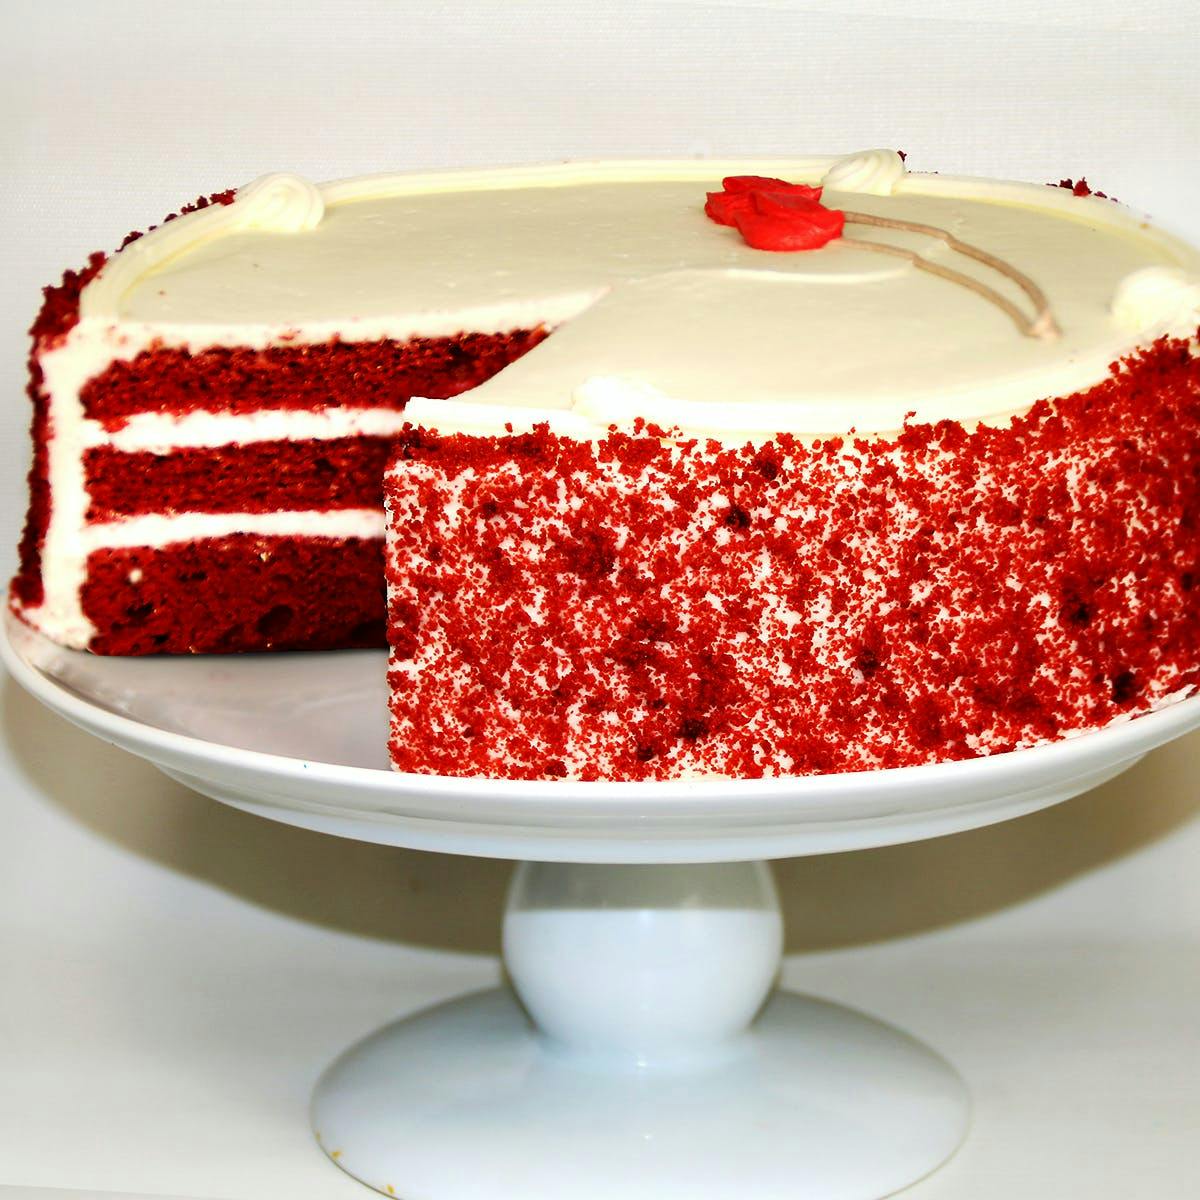 Eat Cake Today - Online Cake Delivery From Malaysia's Best Bakers